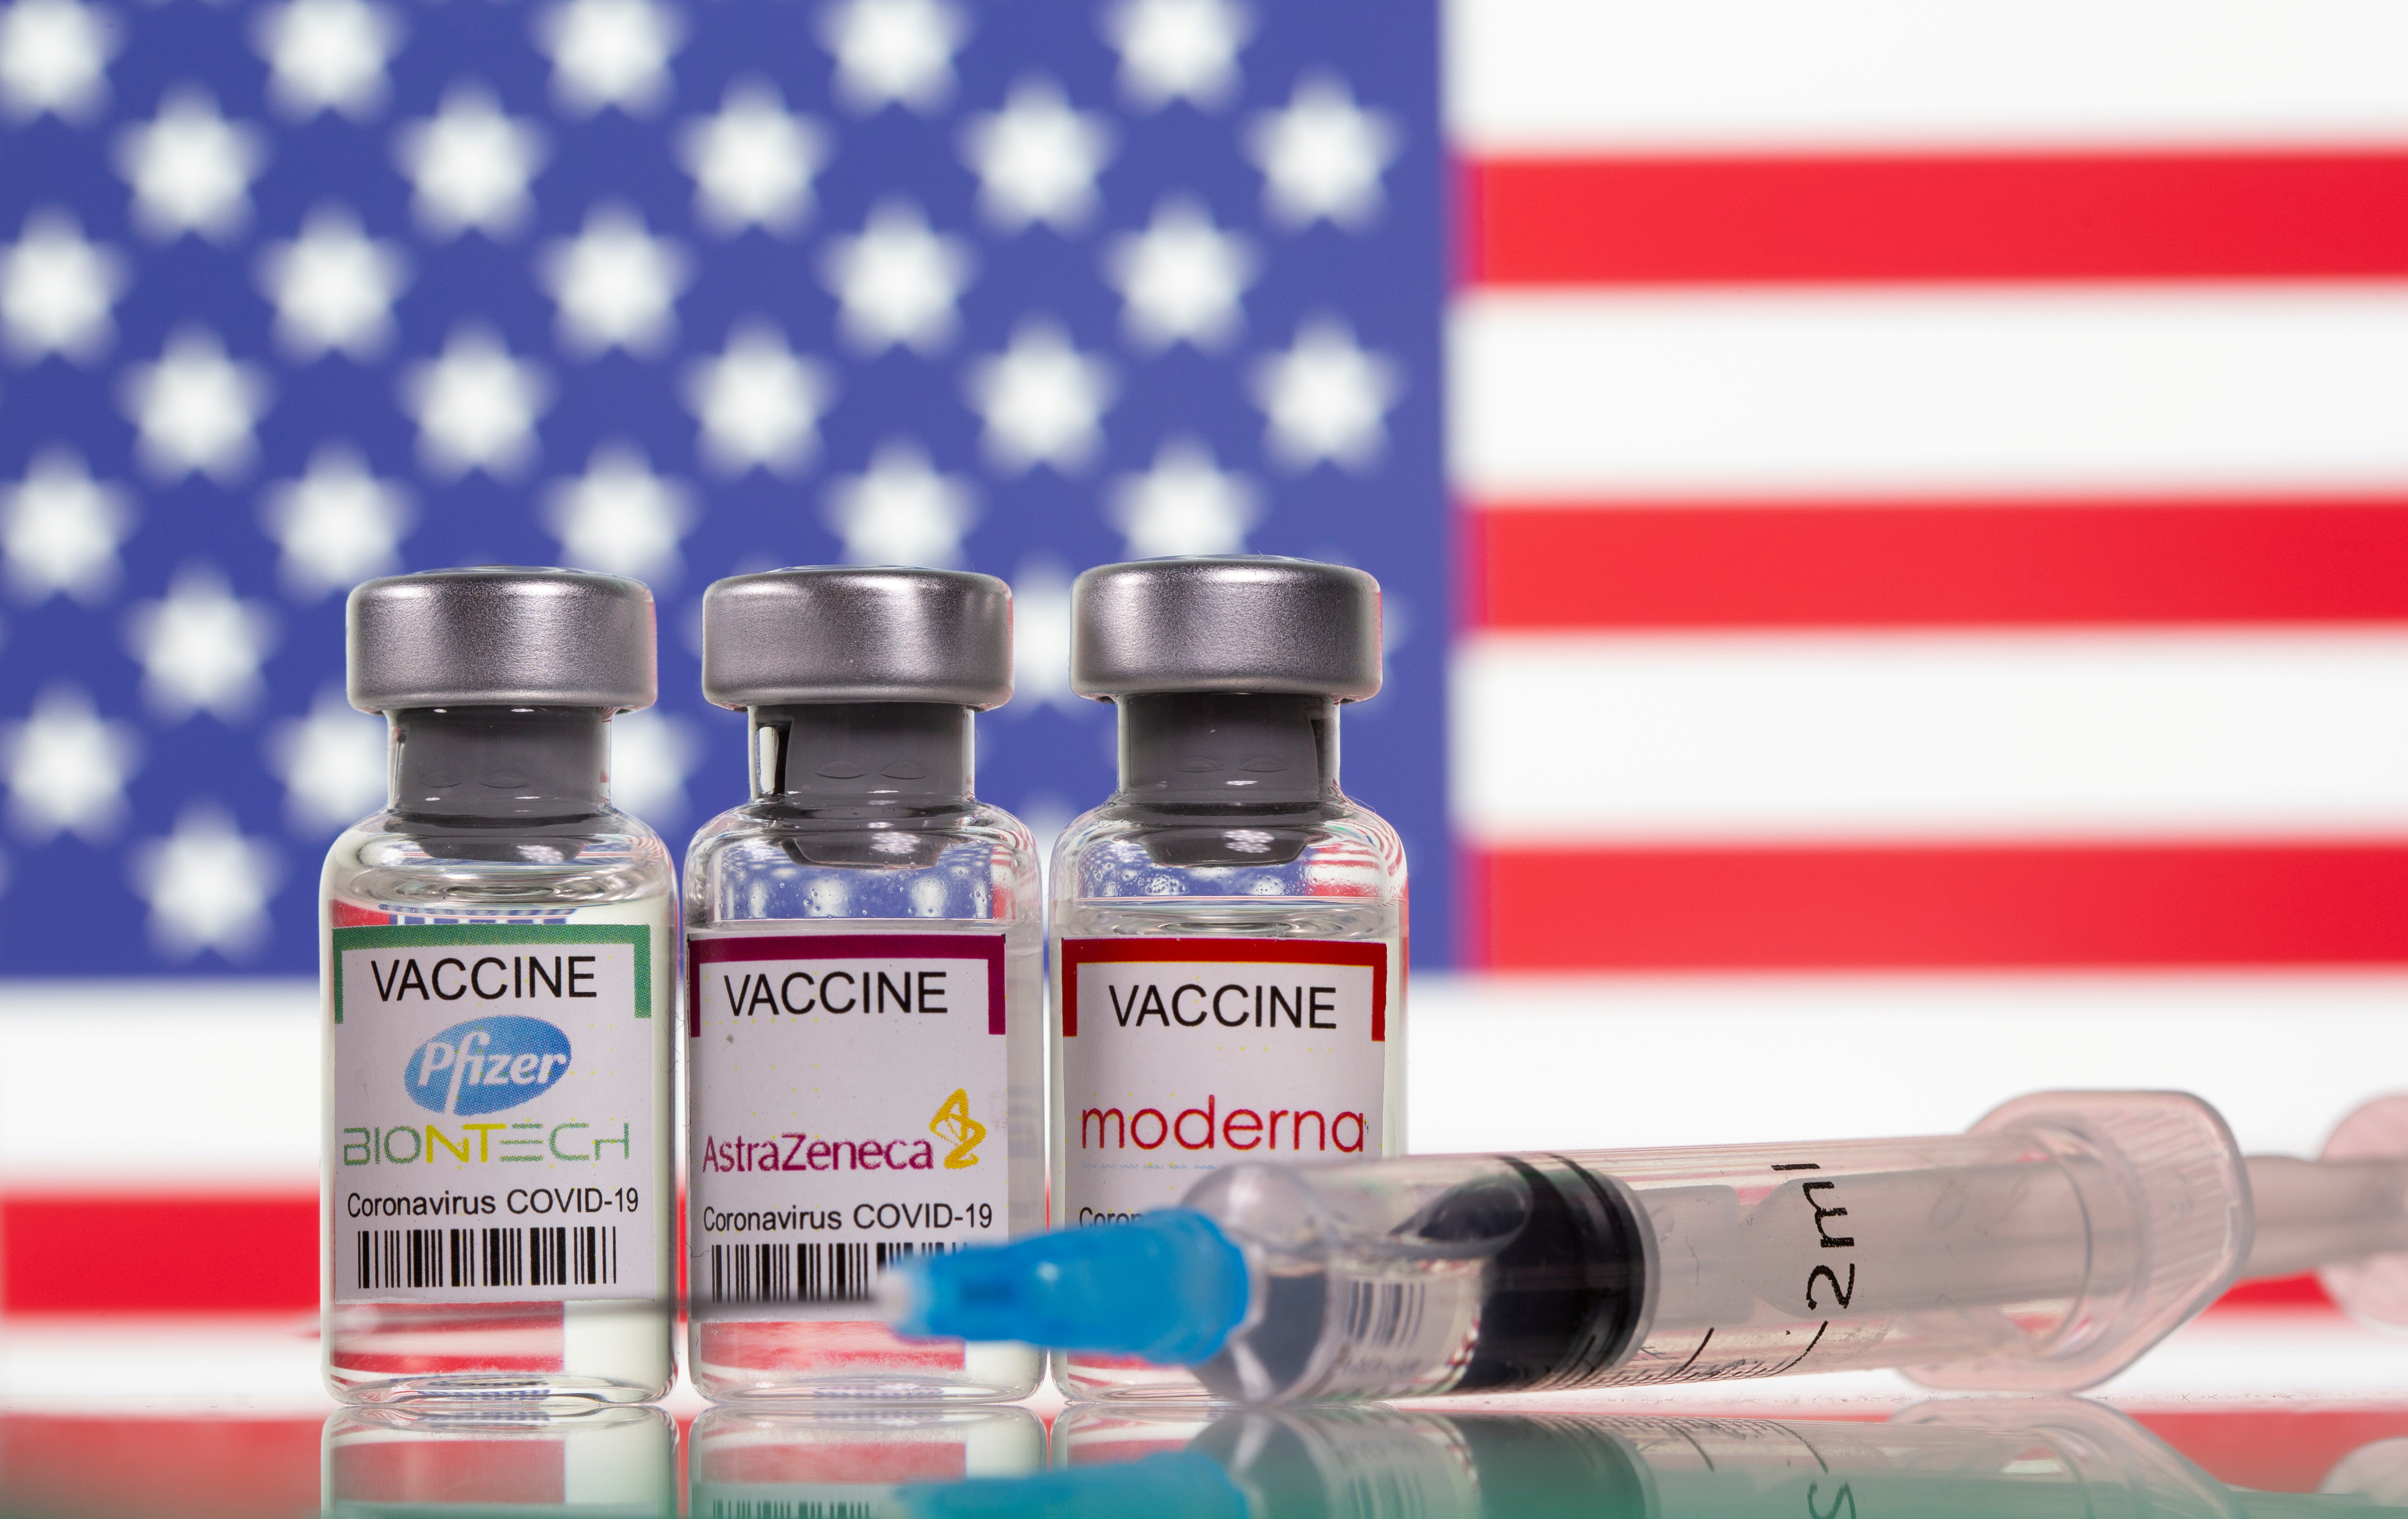 Vials with Pfizer-BioNTech, AstraZeneca, and Moderna coronavirus disease (COVID-19) vaccine labels are seen in front of a U.S. flag in this illustration picture taken March 19, 2021. REUTERS/Dado Ruvic/Illustration/File Photo